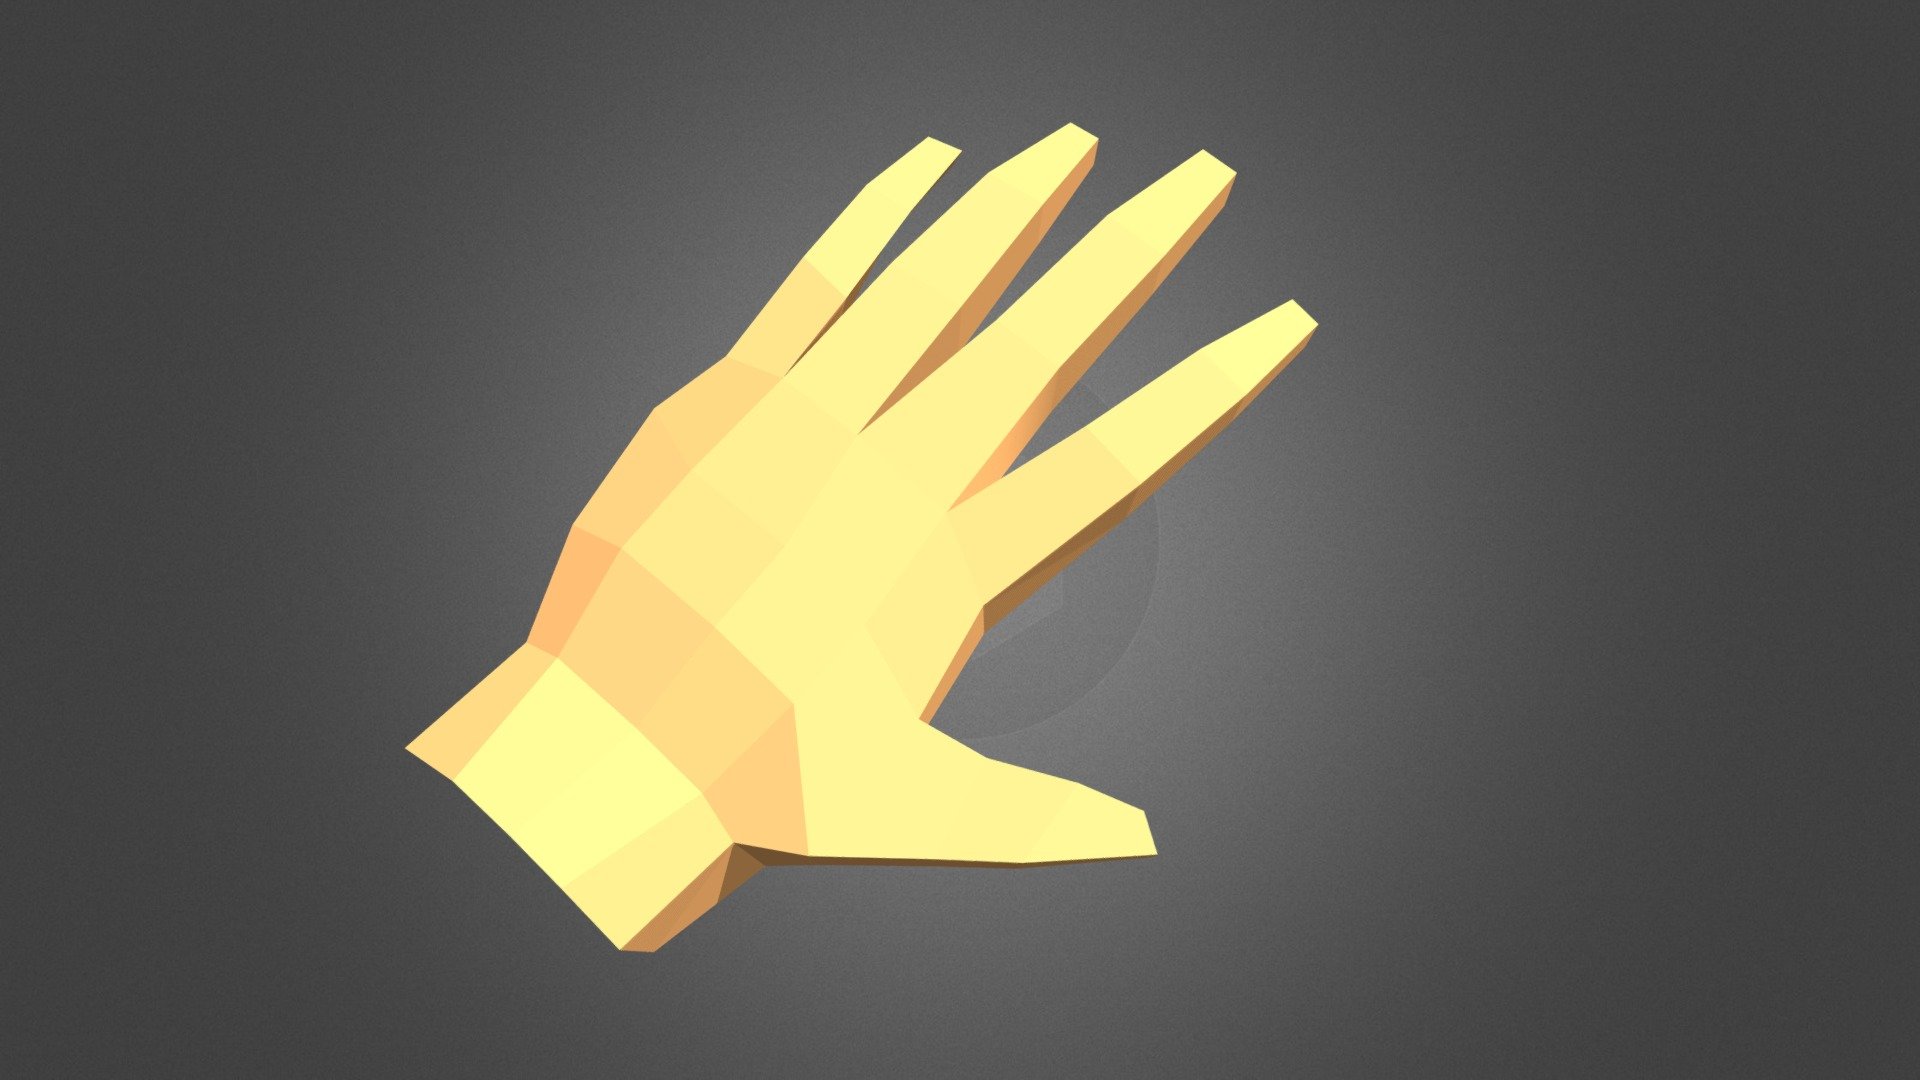 Low poly human hand